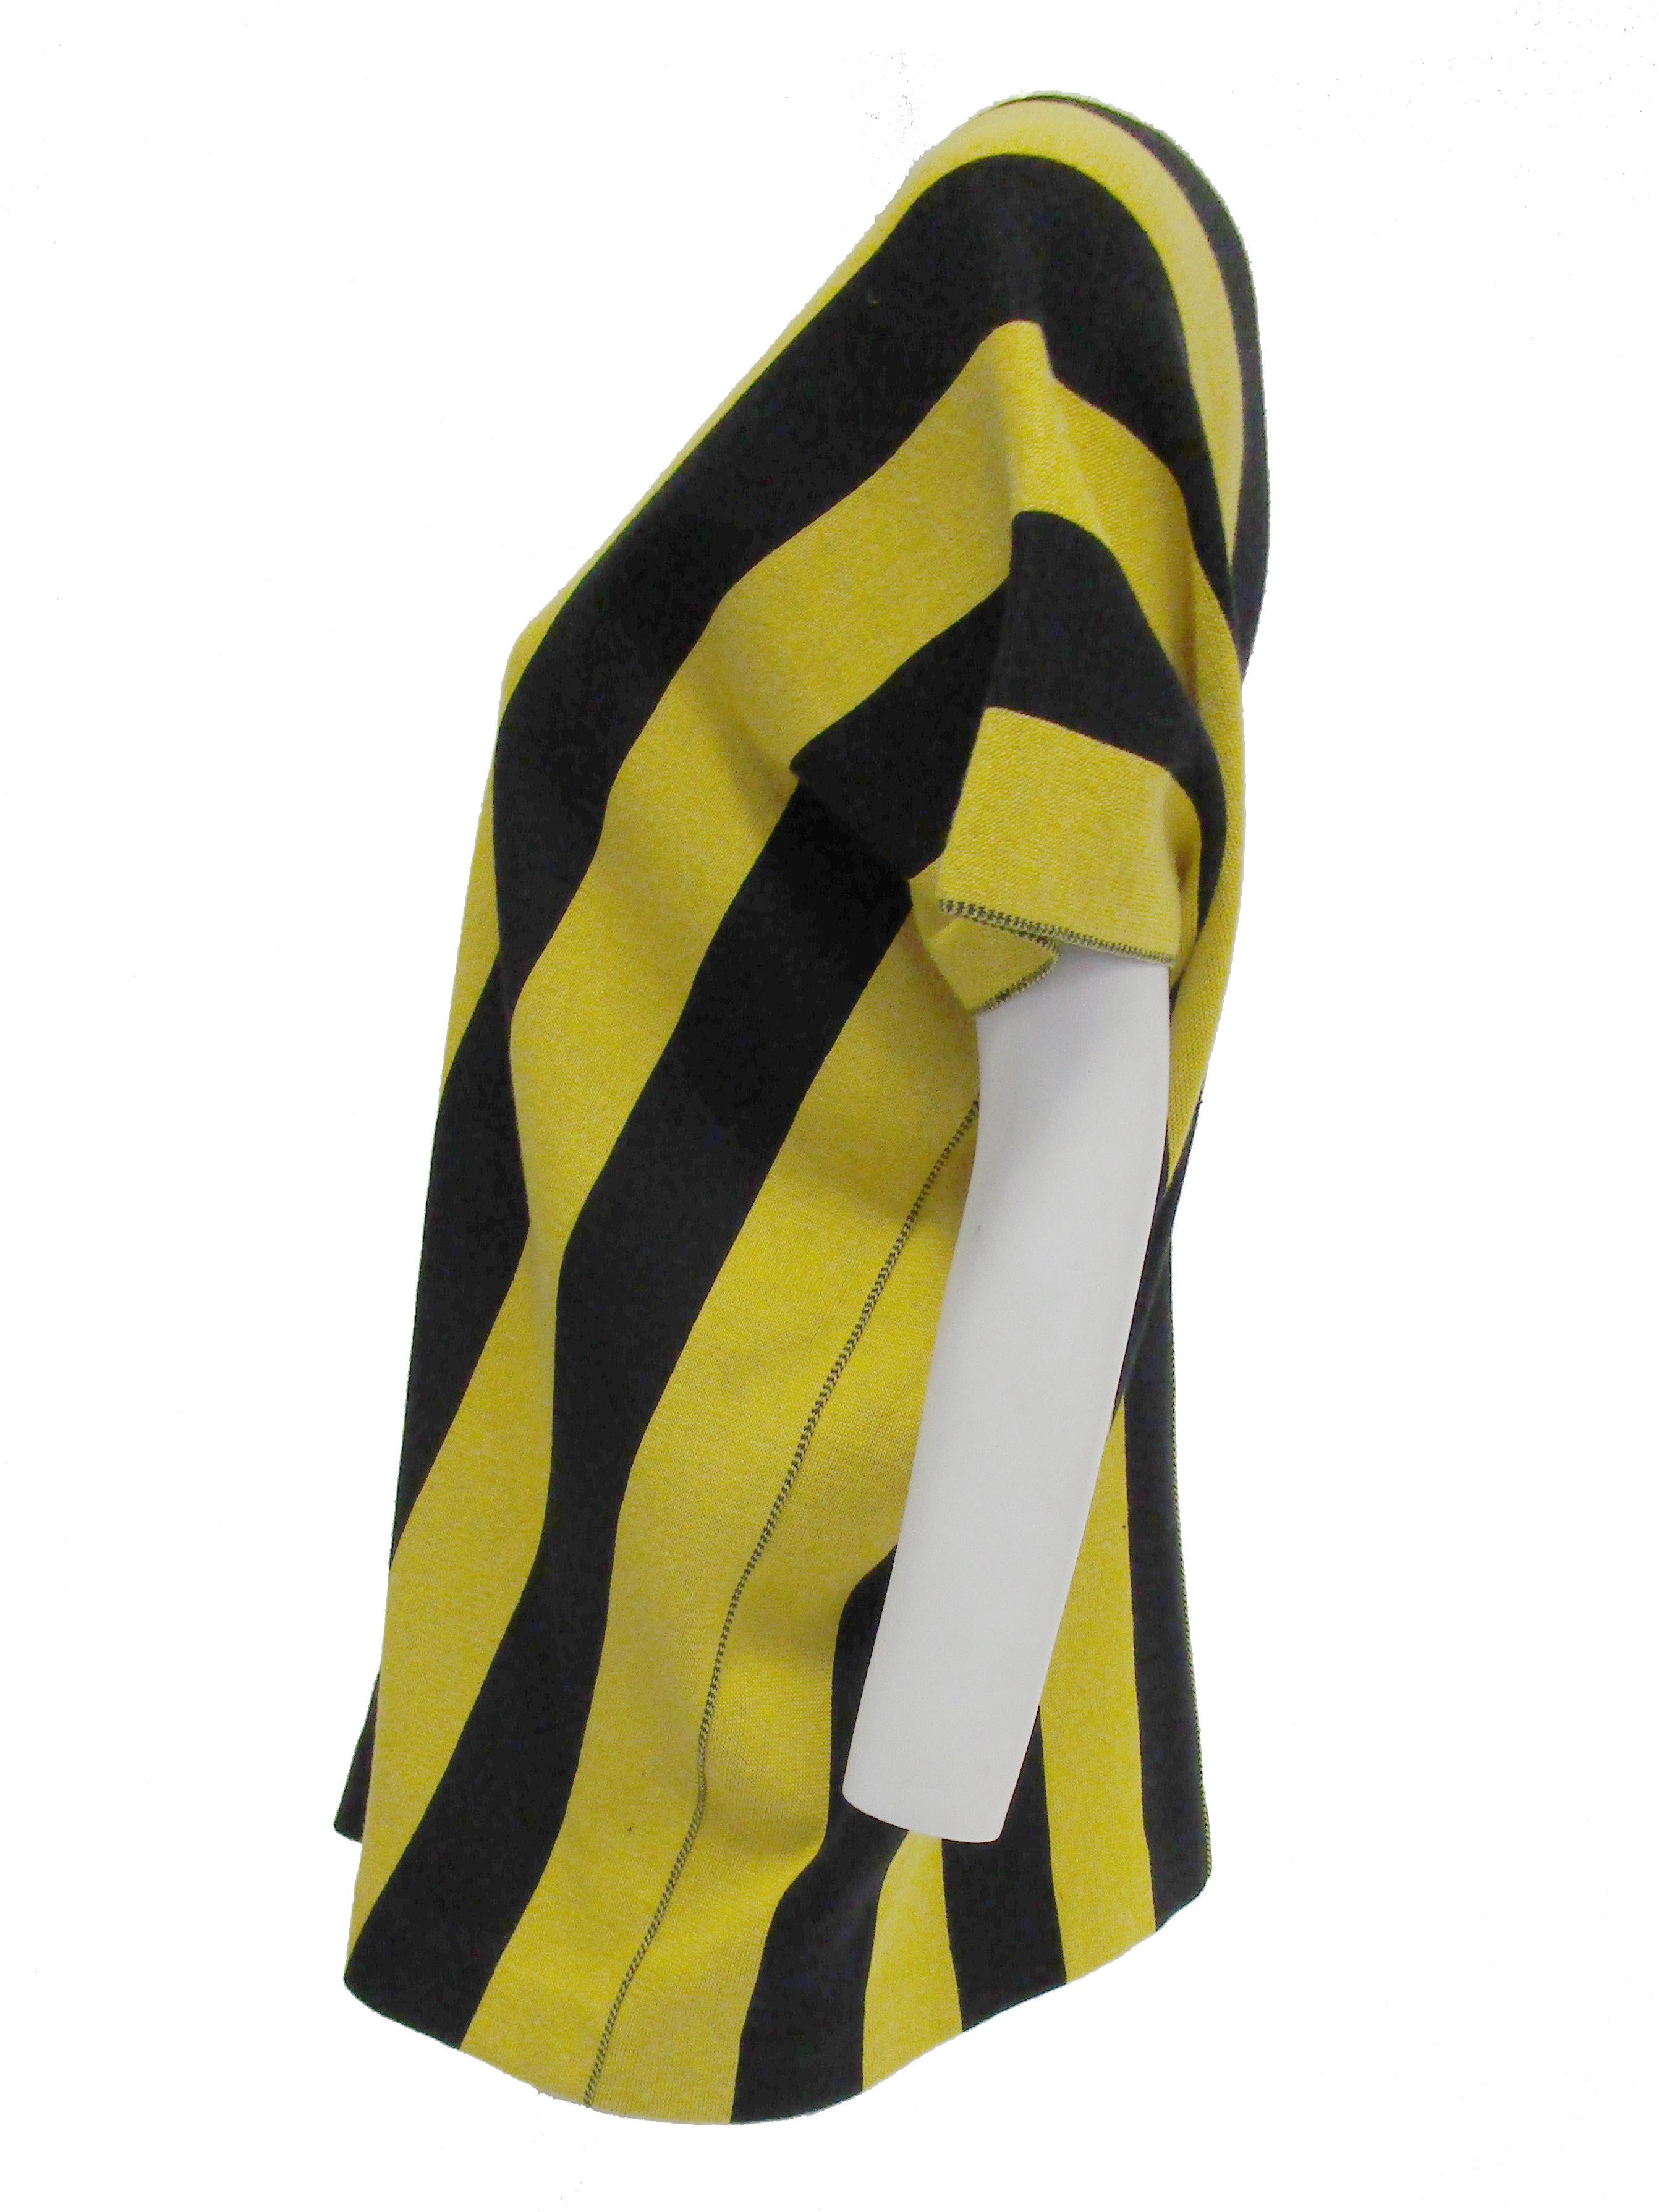 1980s Issey Miyake Yellow and Black Diamond and Stripe Cotton Knit Top In Good Condition For Sale In Houston, TX